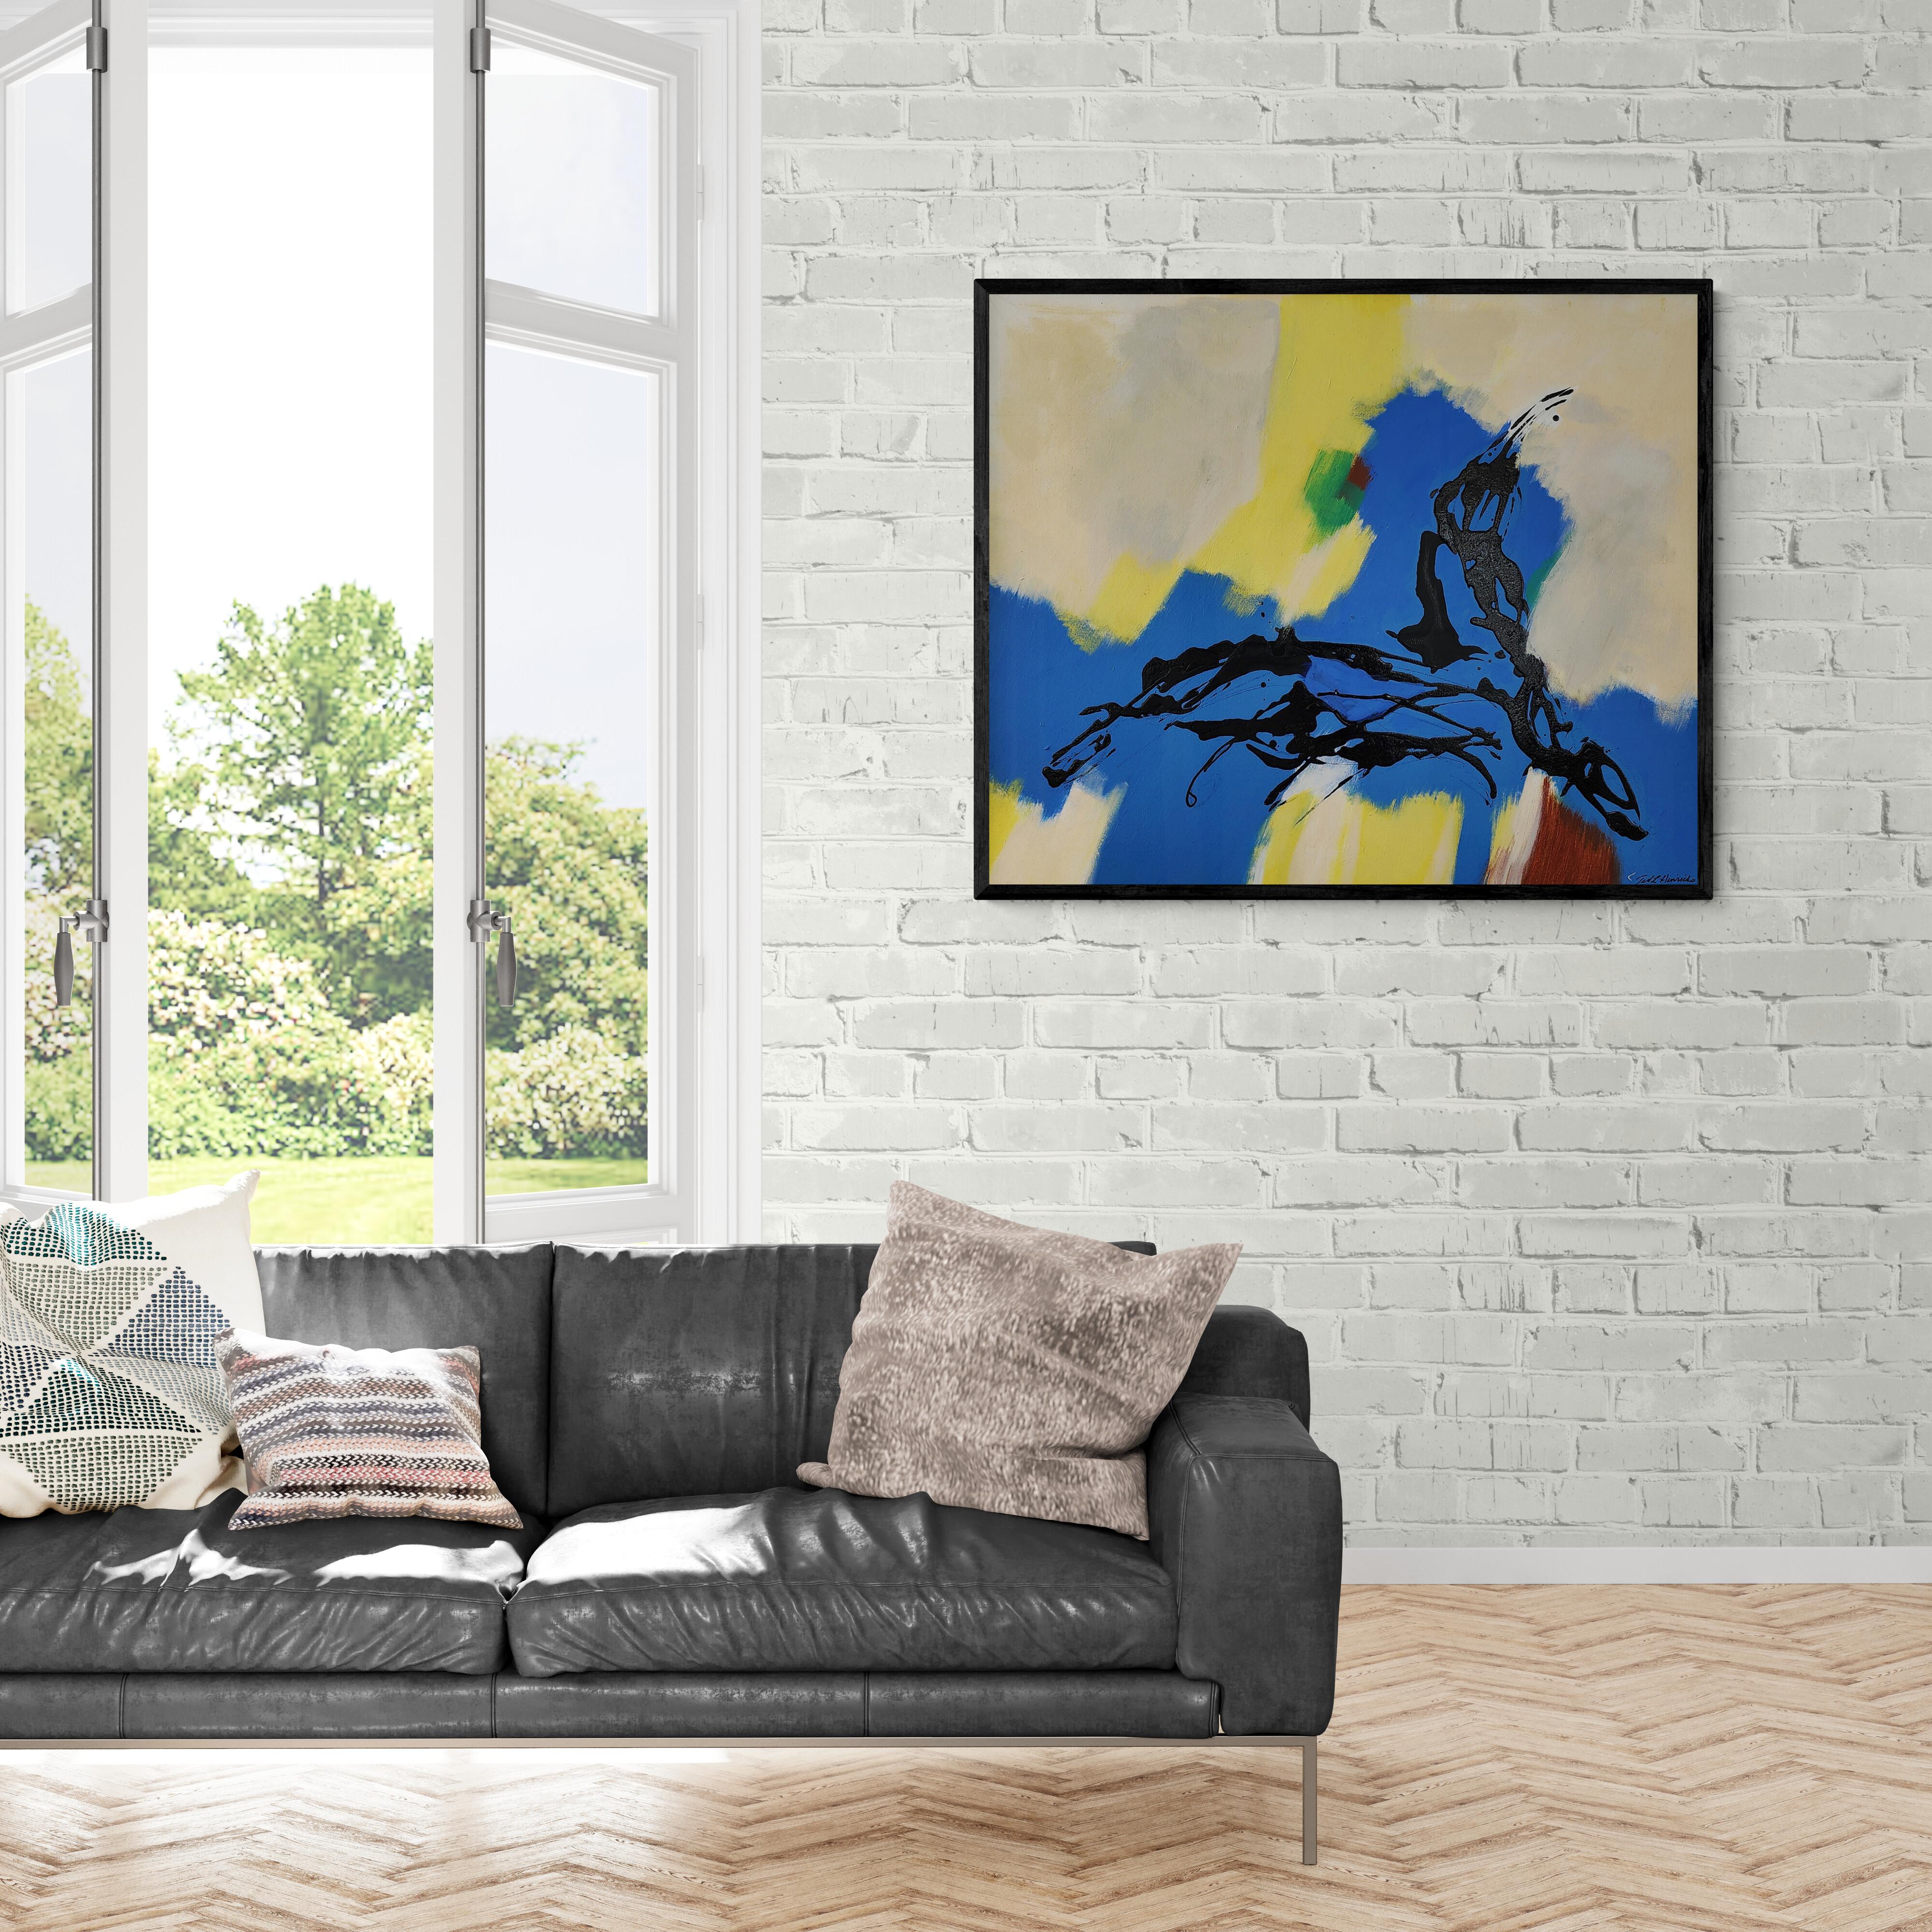 Casual (Gestural Abstraction, Blue, Black, Yellow, Green, Red, Minimal) - Contemporary Painting by Ted Hinrichs